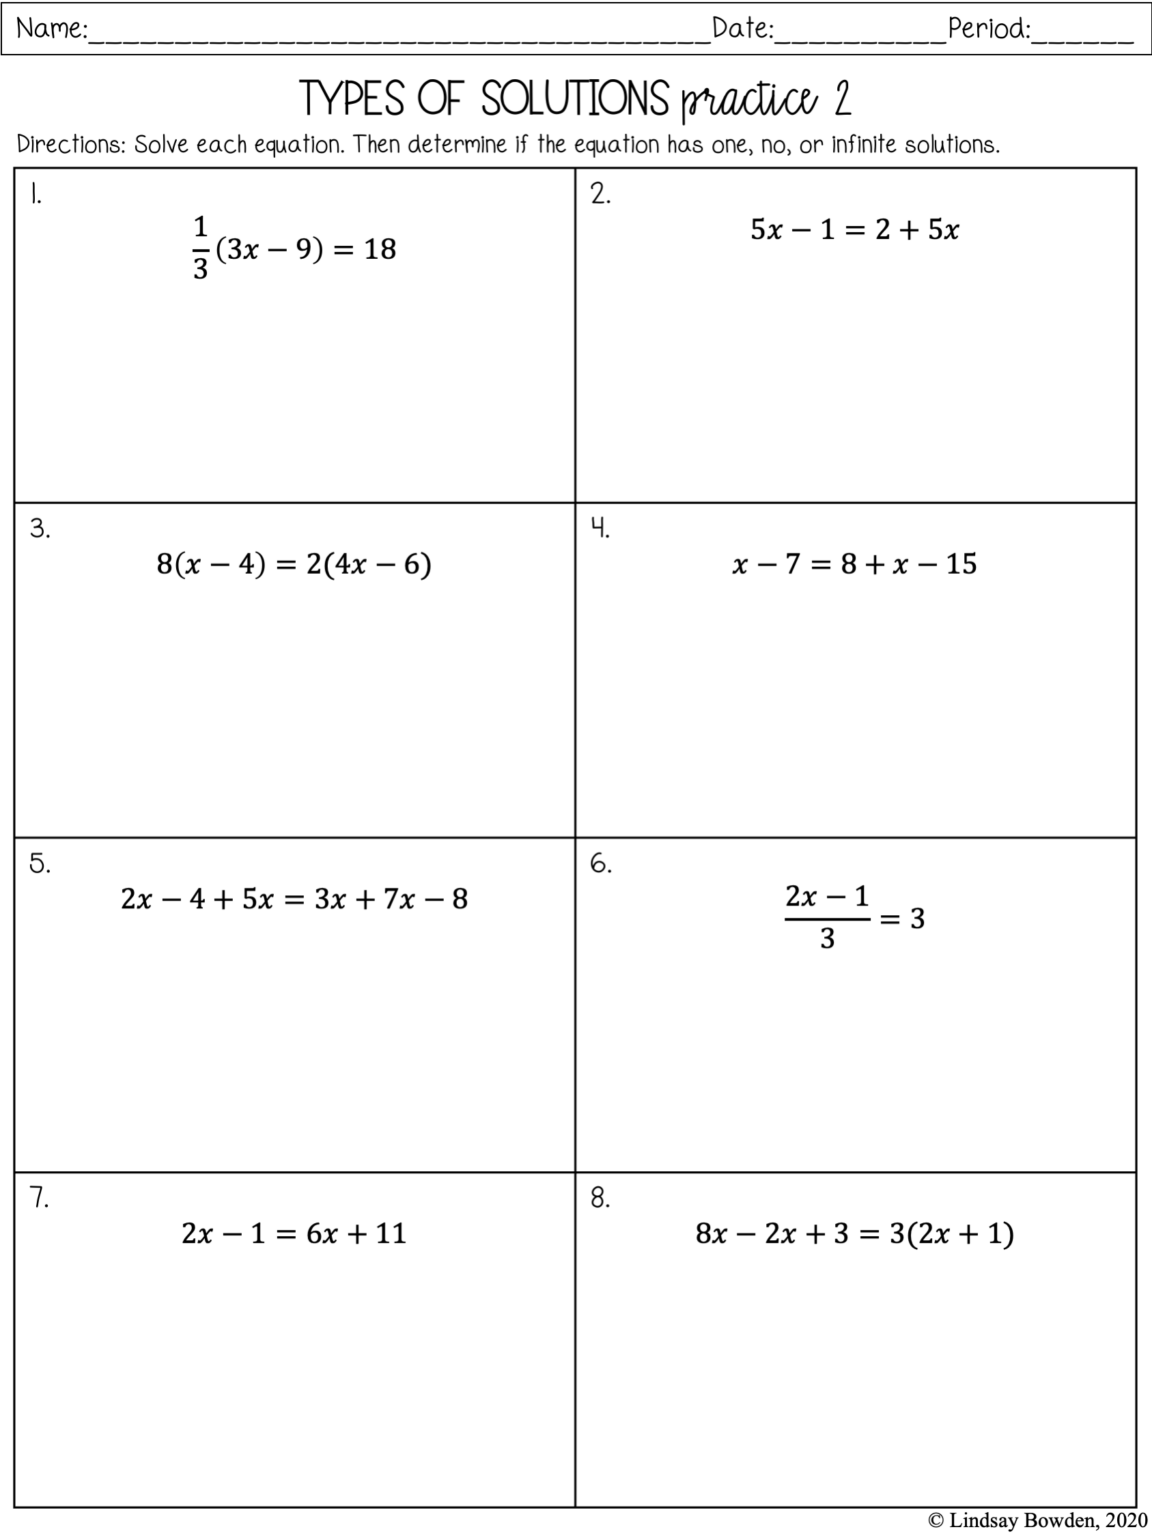 Types Of Solutions Notes And Worksheets Lindsay Bowden 2158